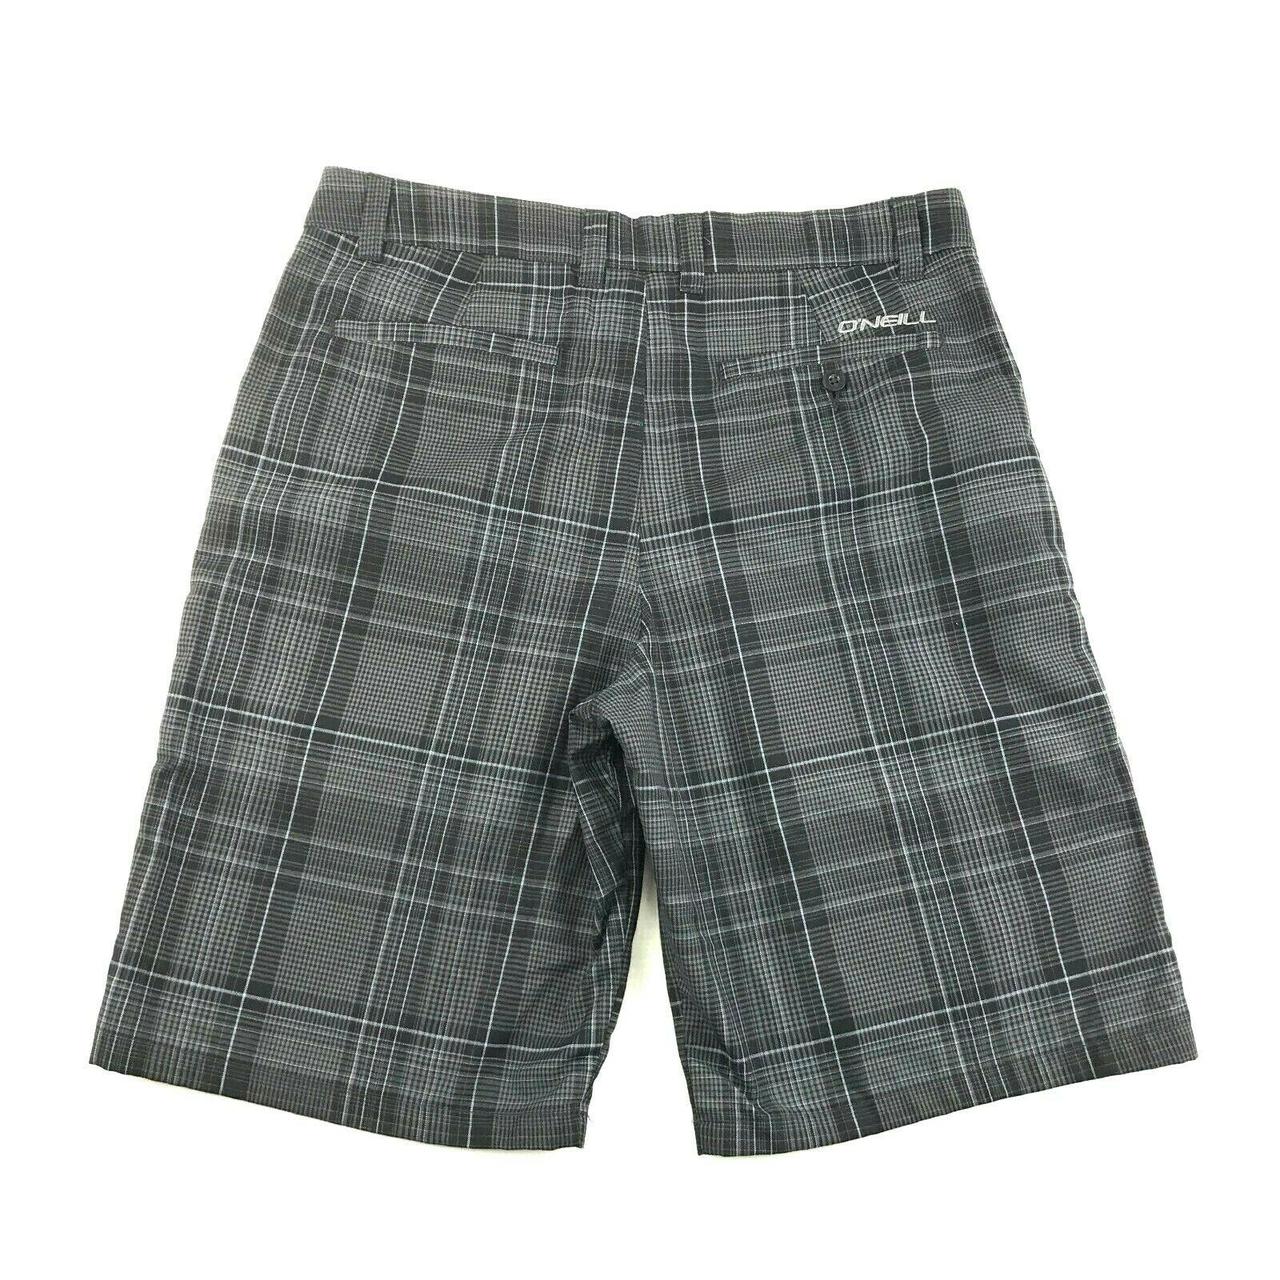 ONEILL Mens Plaid Flat Front Shorts